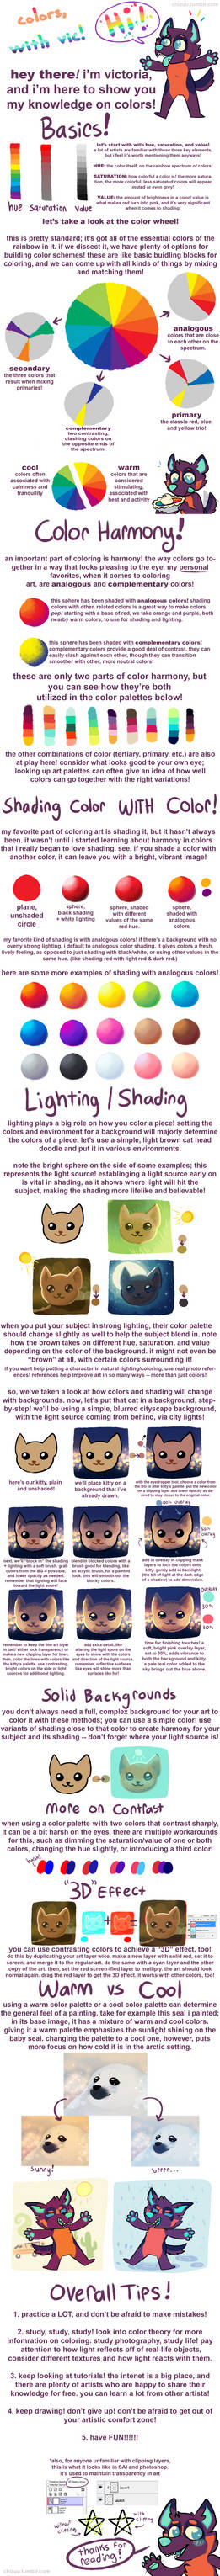 Tutorials With Vic: COLOR!